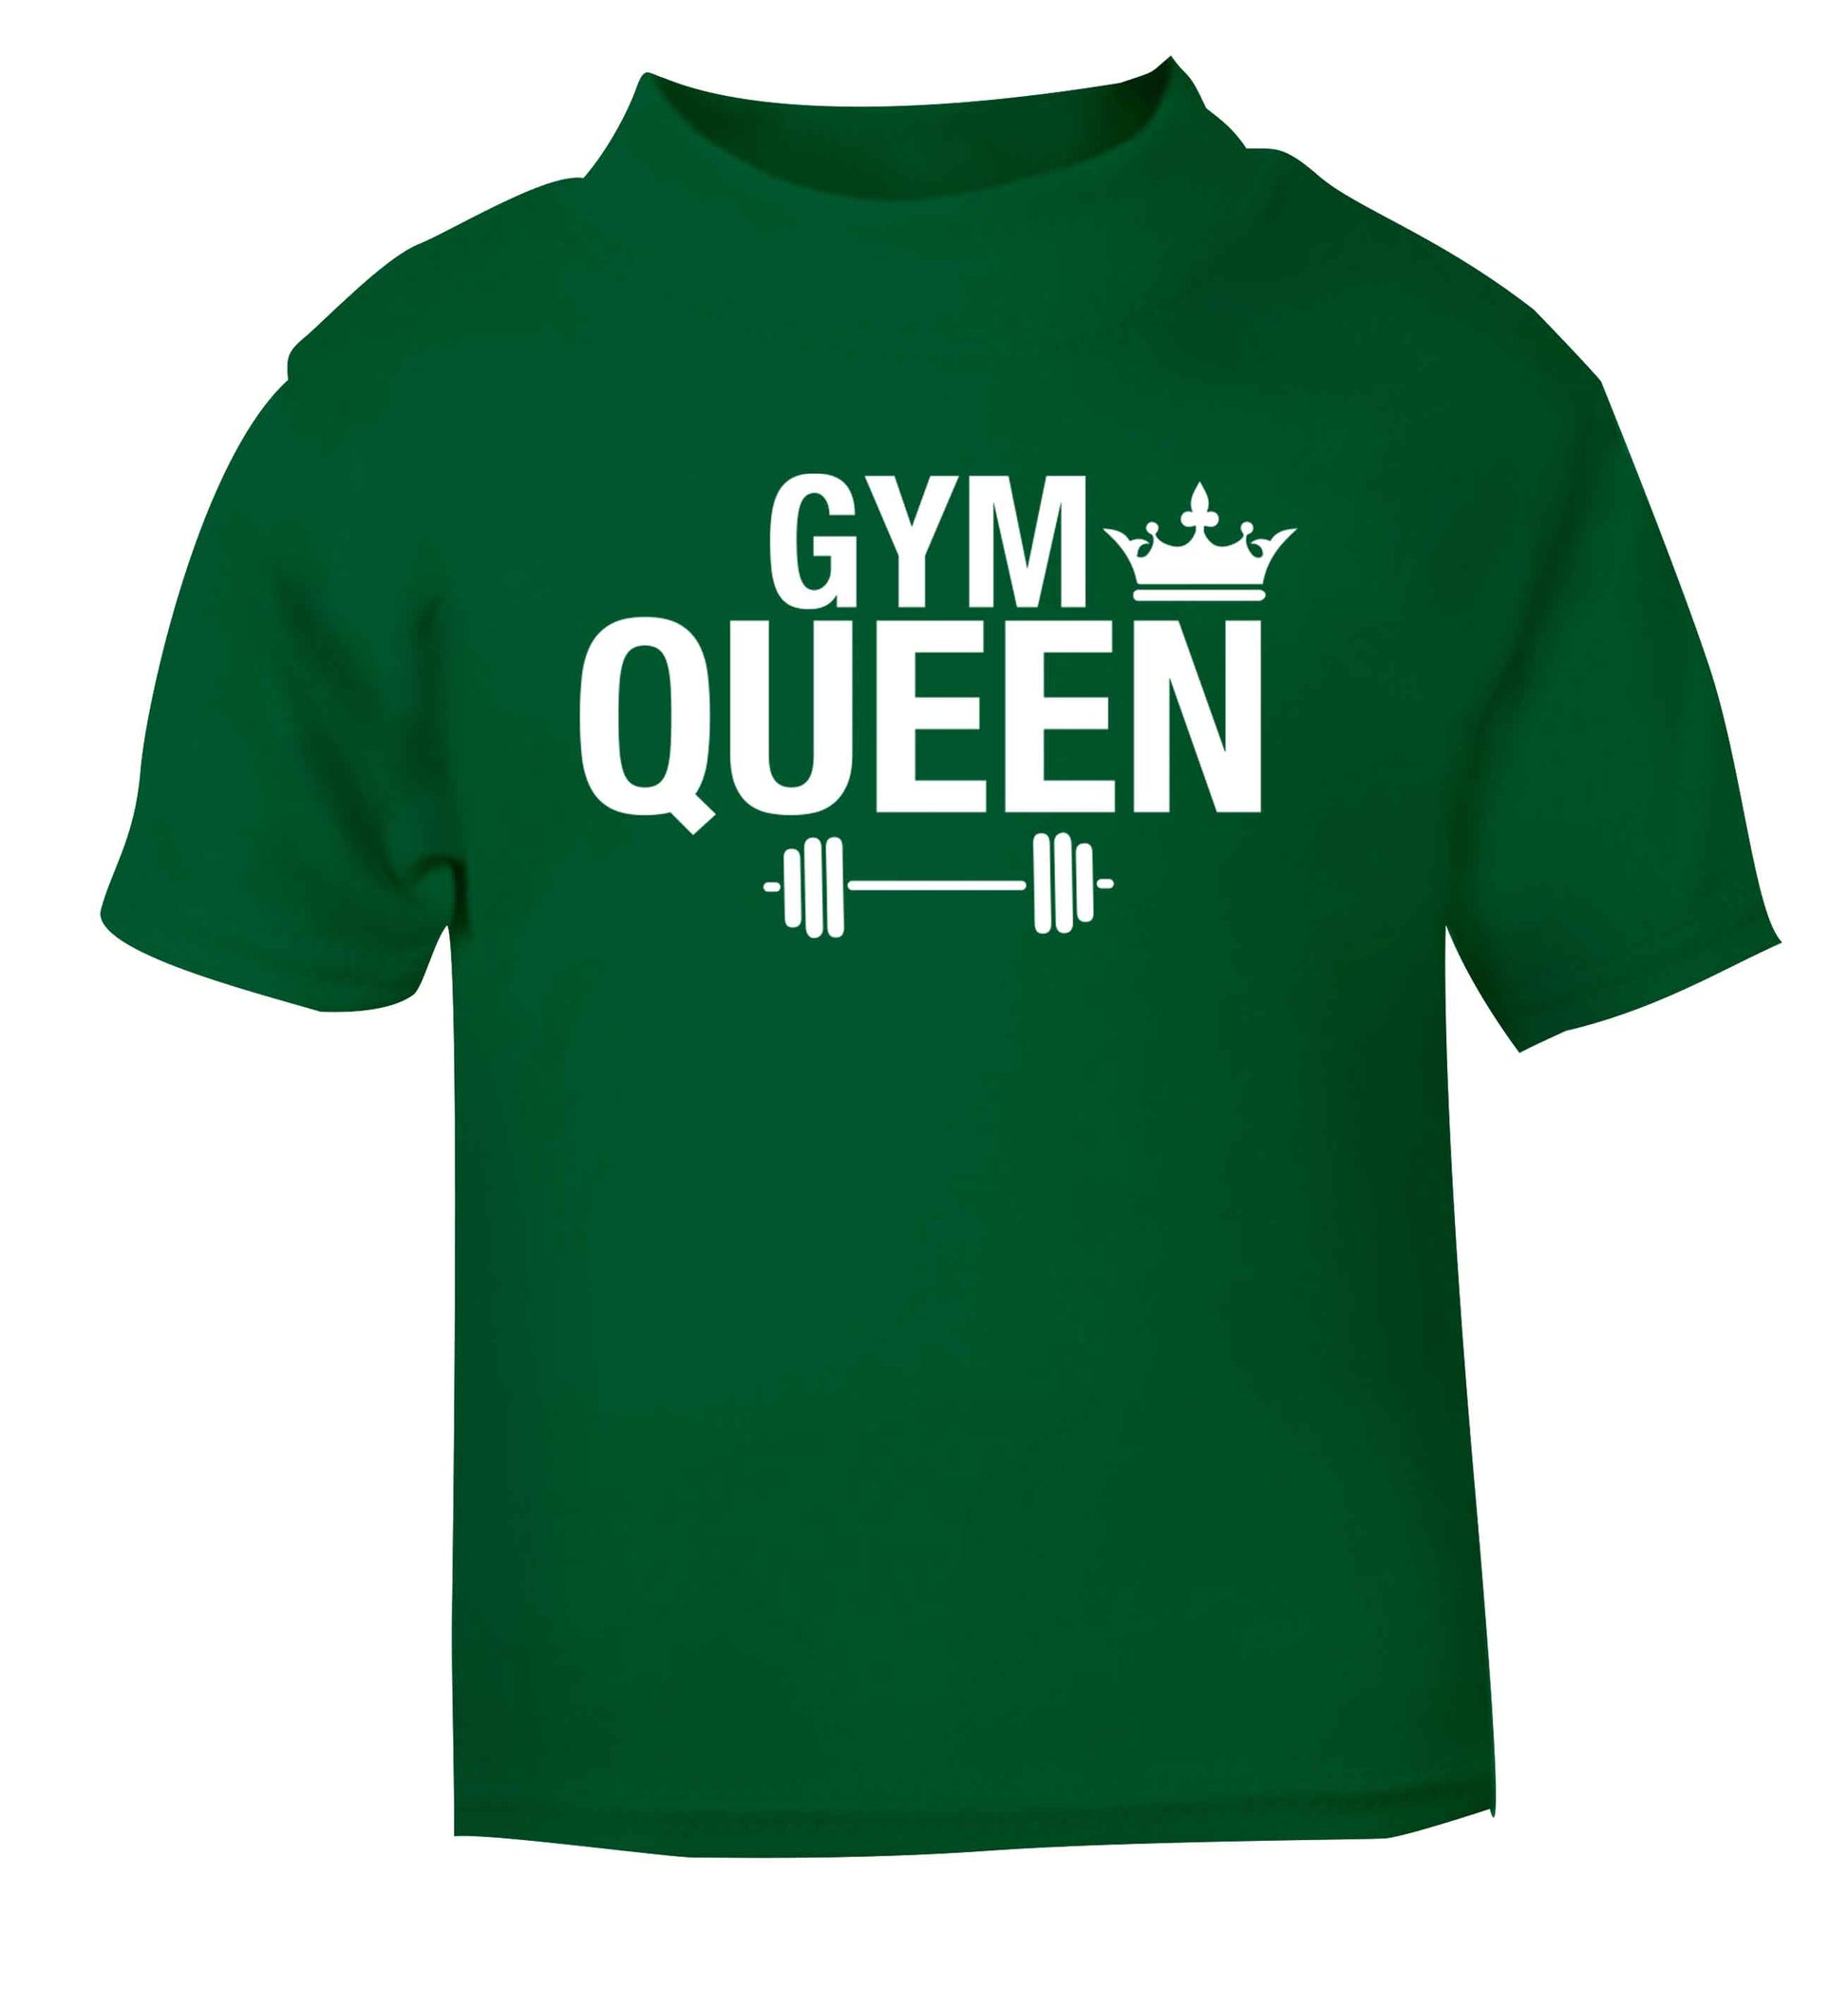 Gym queen green Baby Toddler Tshirt 2 Years